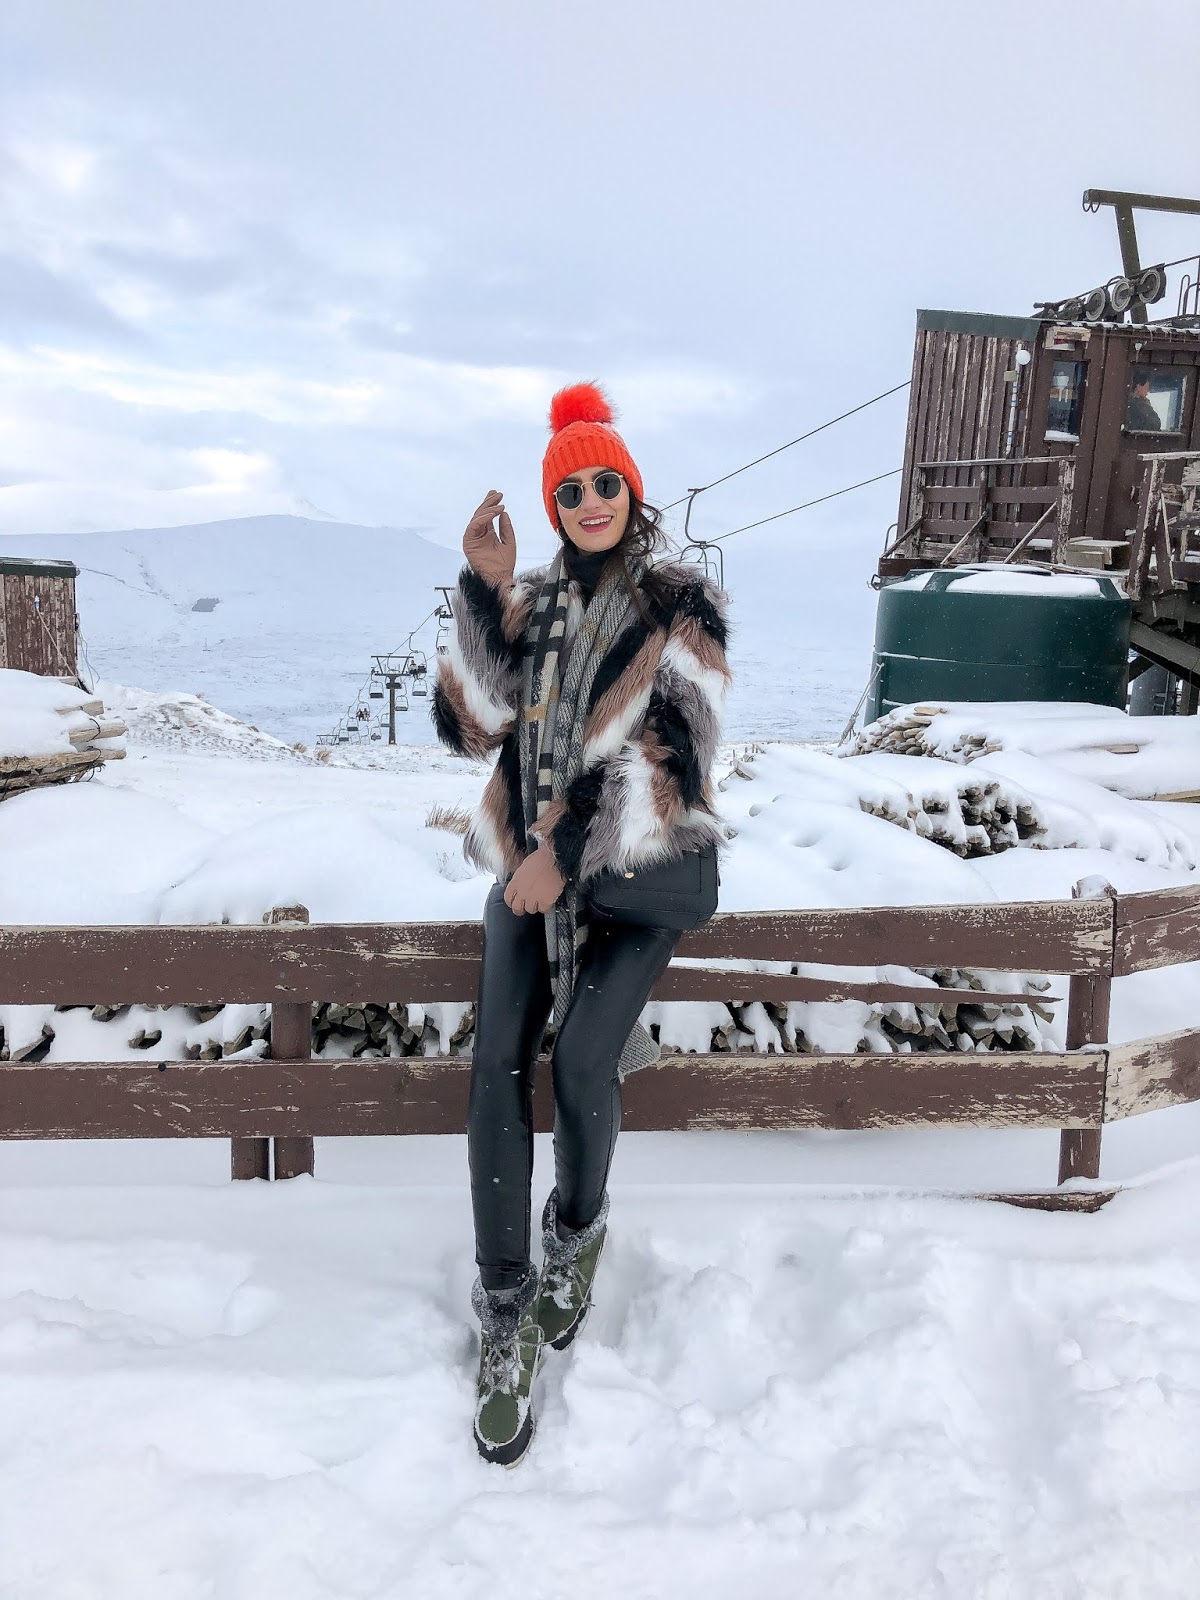 Skiing outfit ideas that will not ruin your budget and make you look stylish